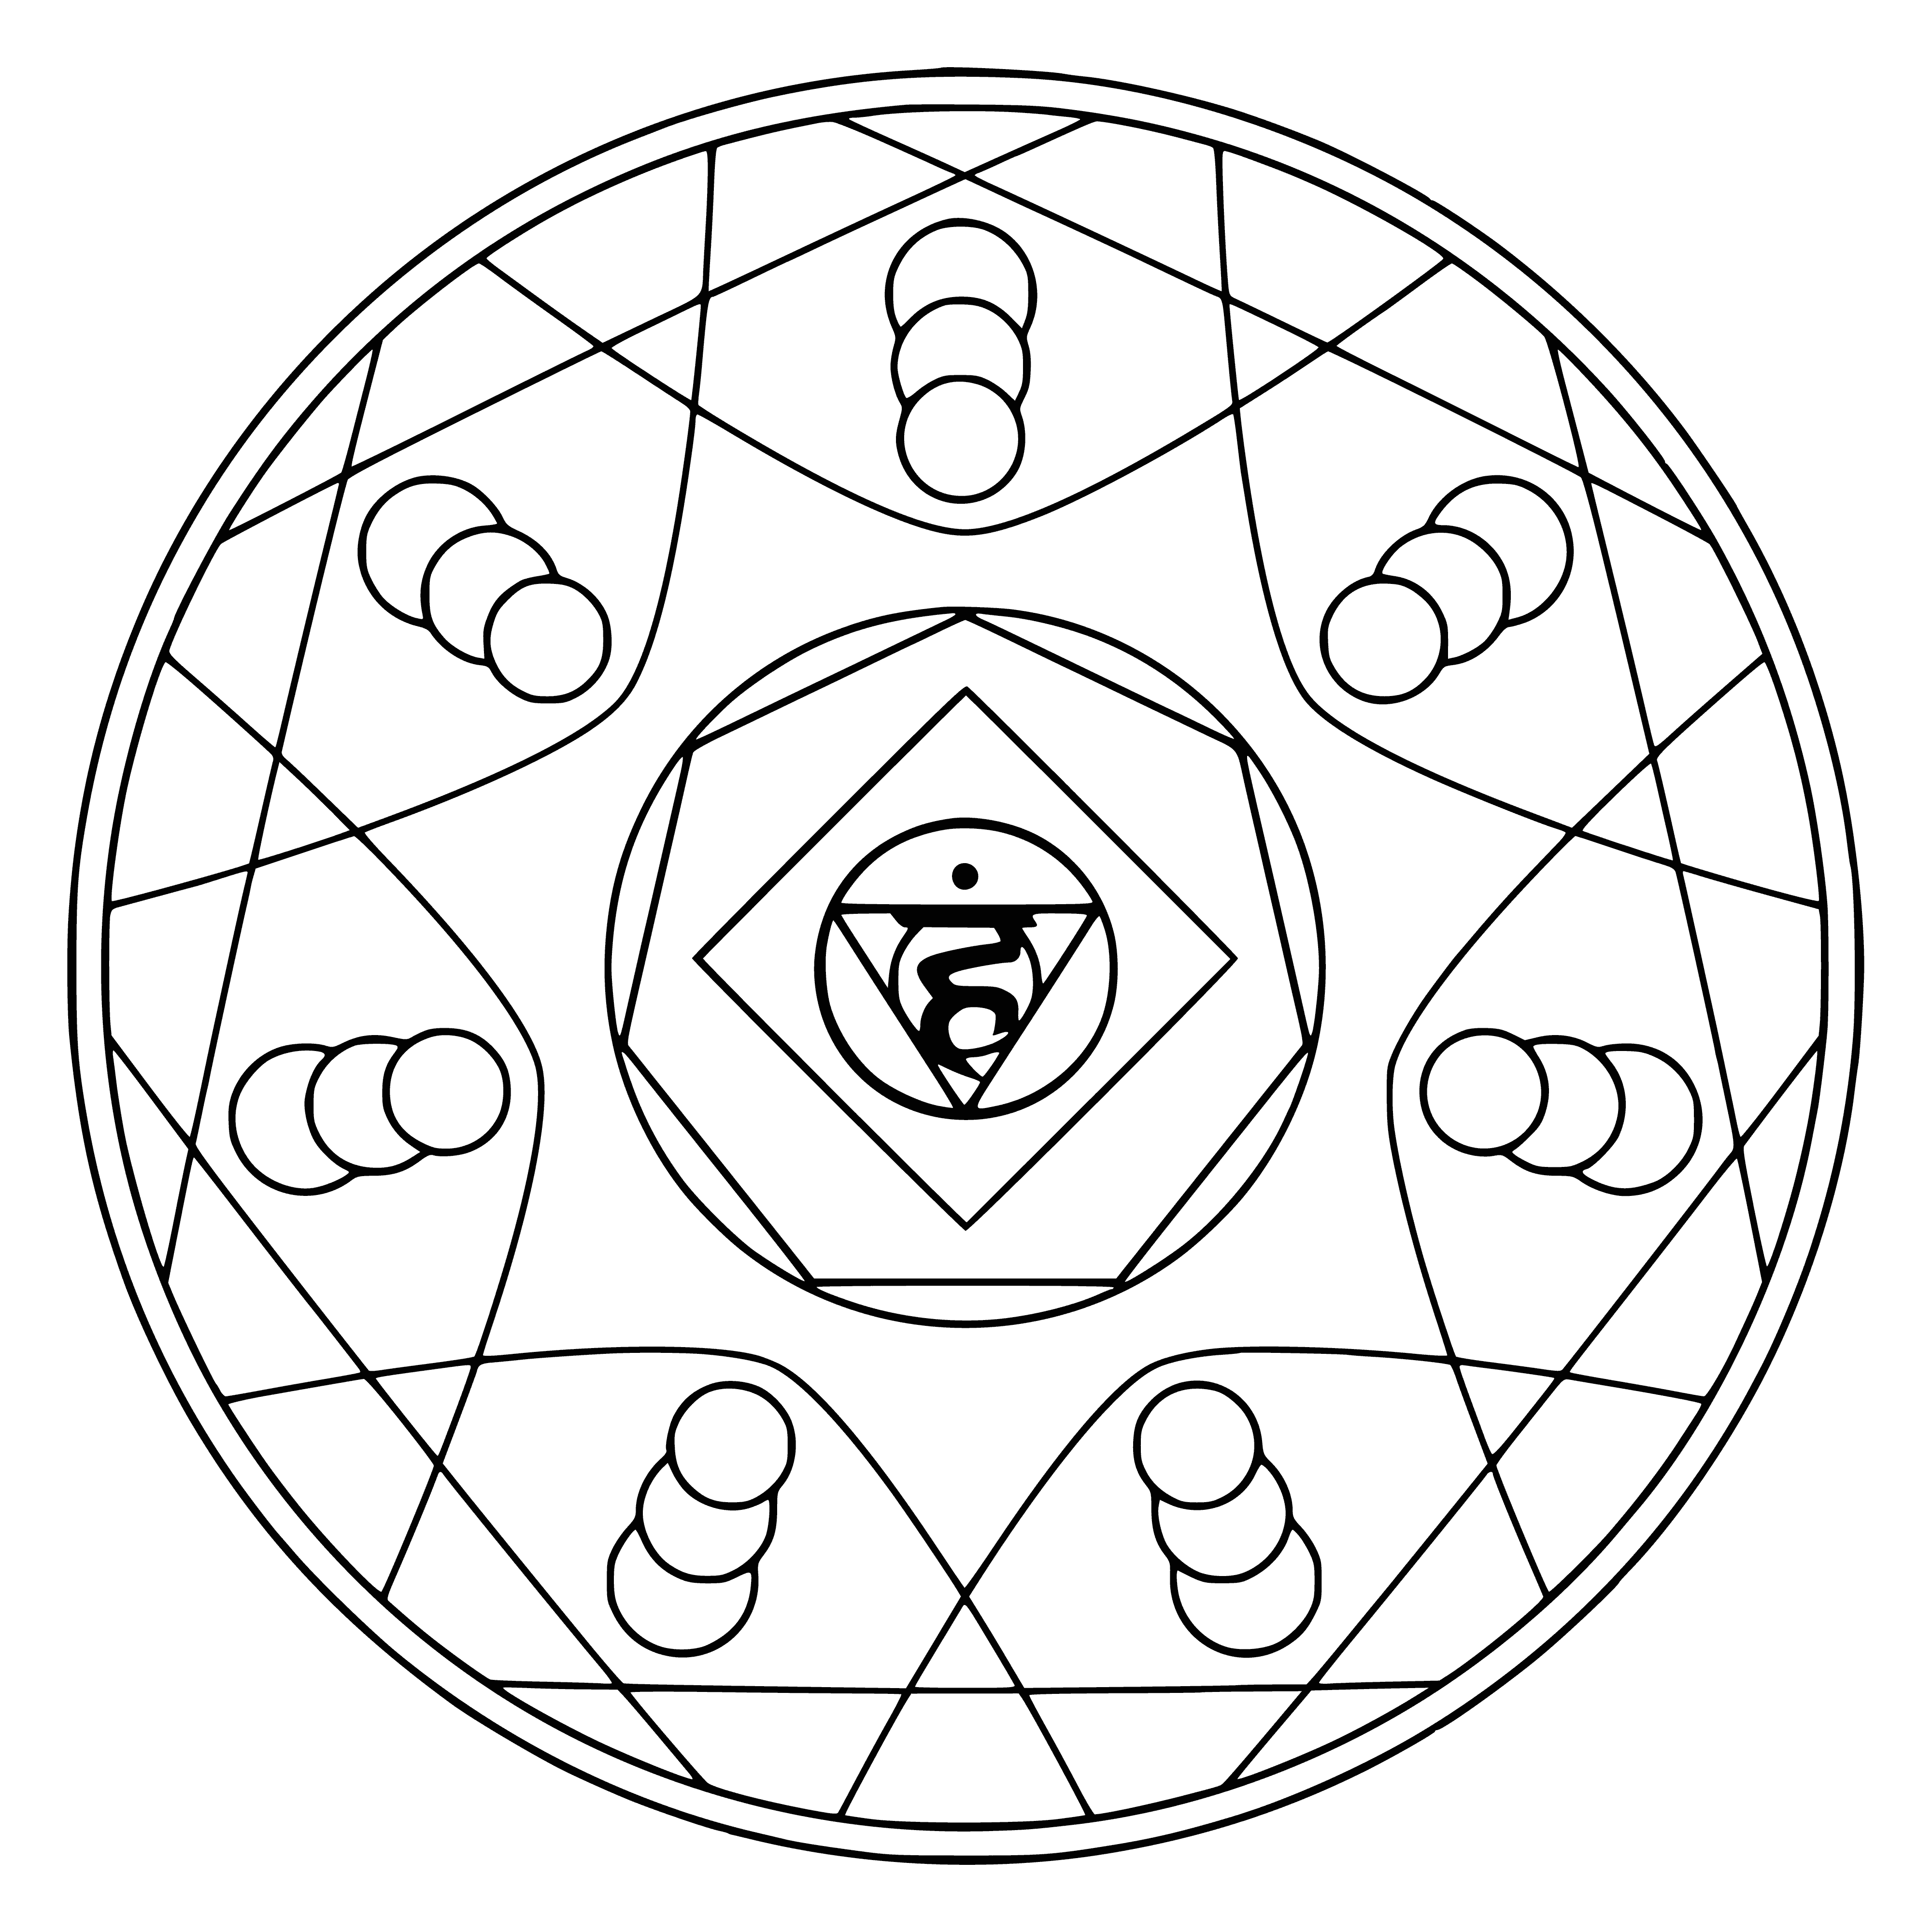 coloring page: Mandalas symbolize the cosmic order and contain designs with a central point and four quadrants, each with a different symbol. Symbol of Vishudha is found in the center.